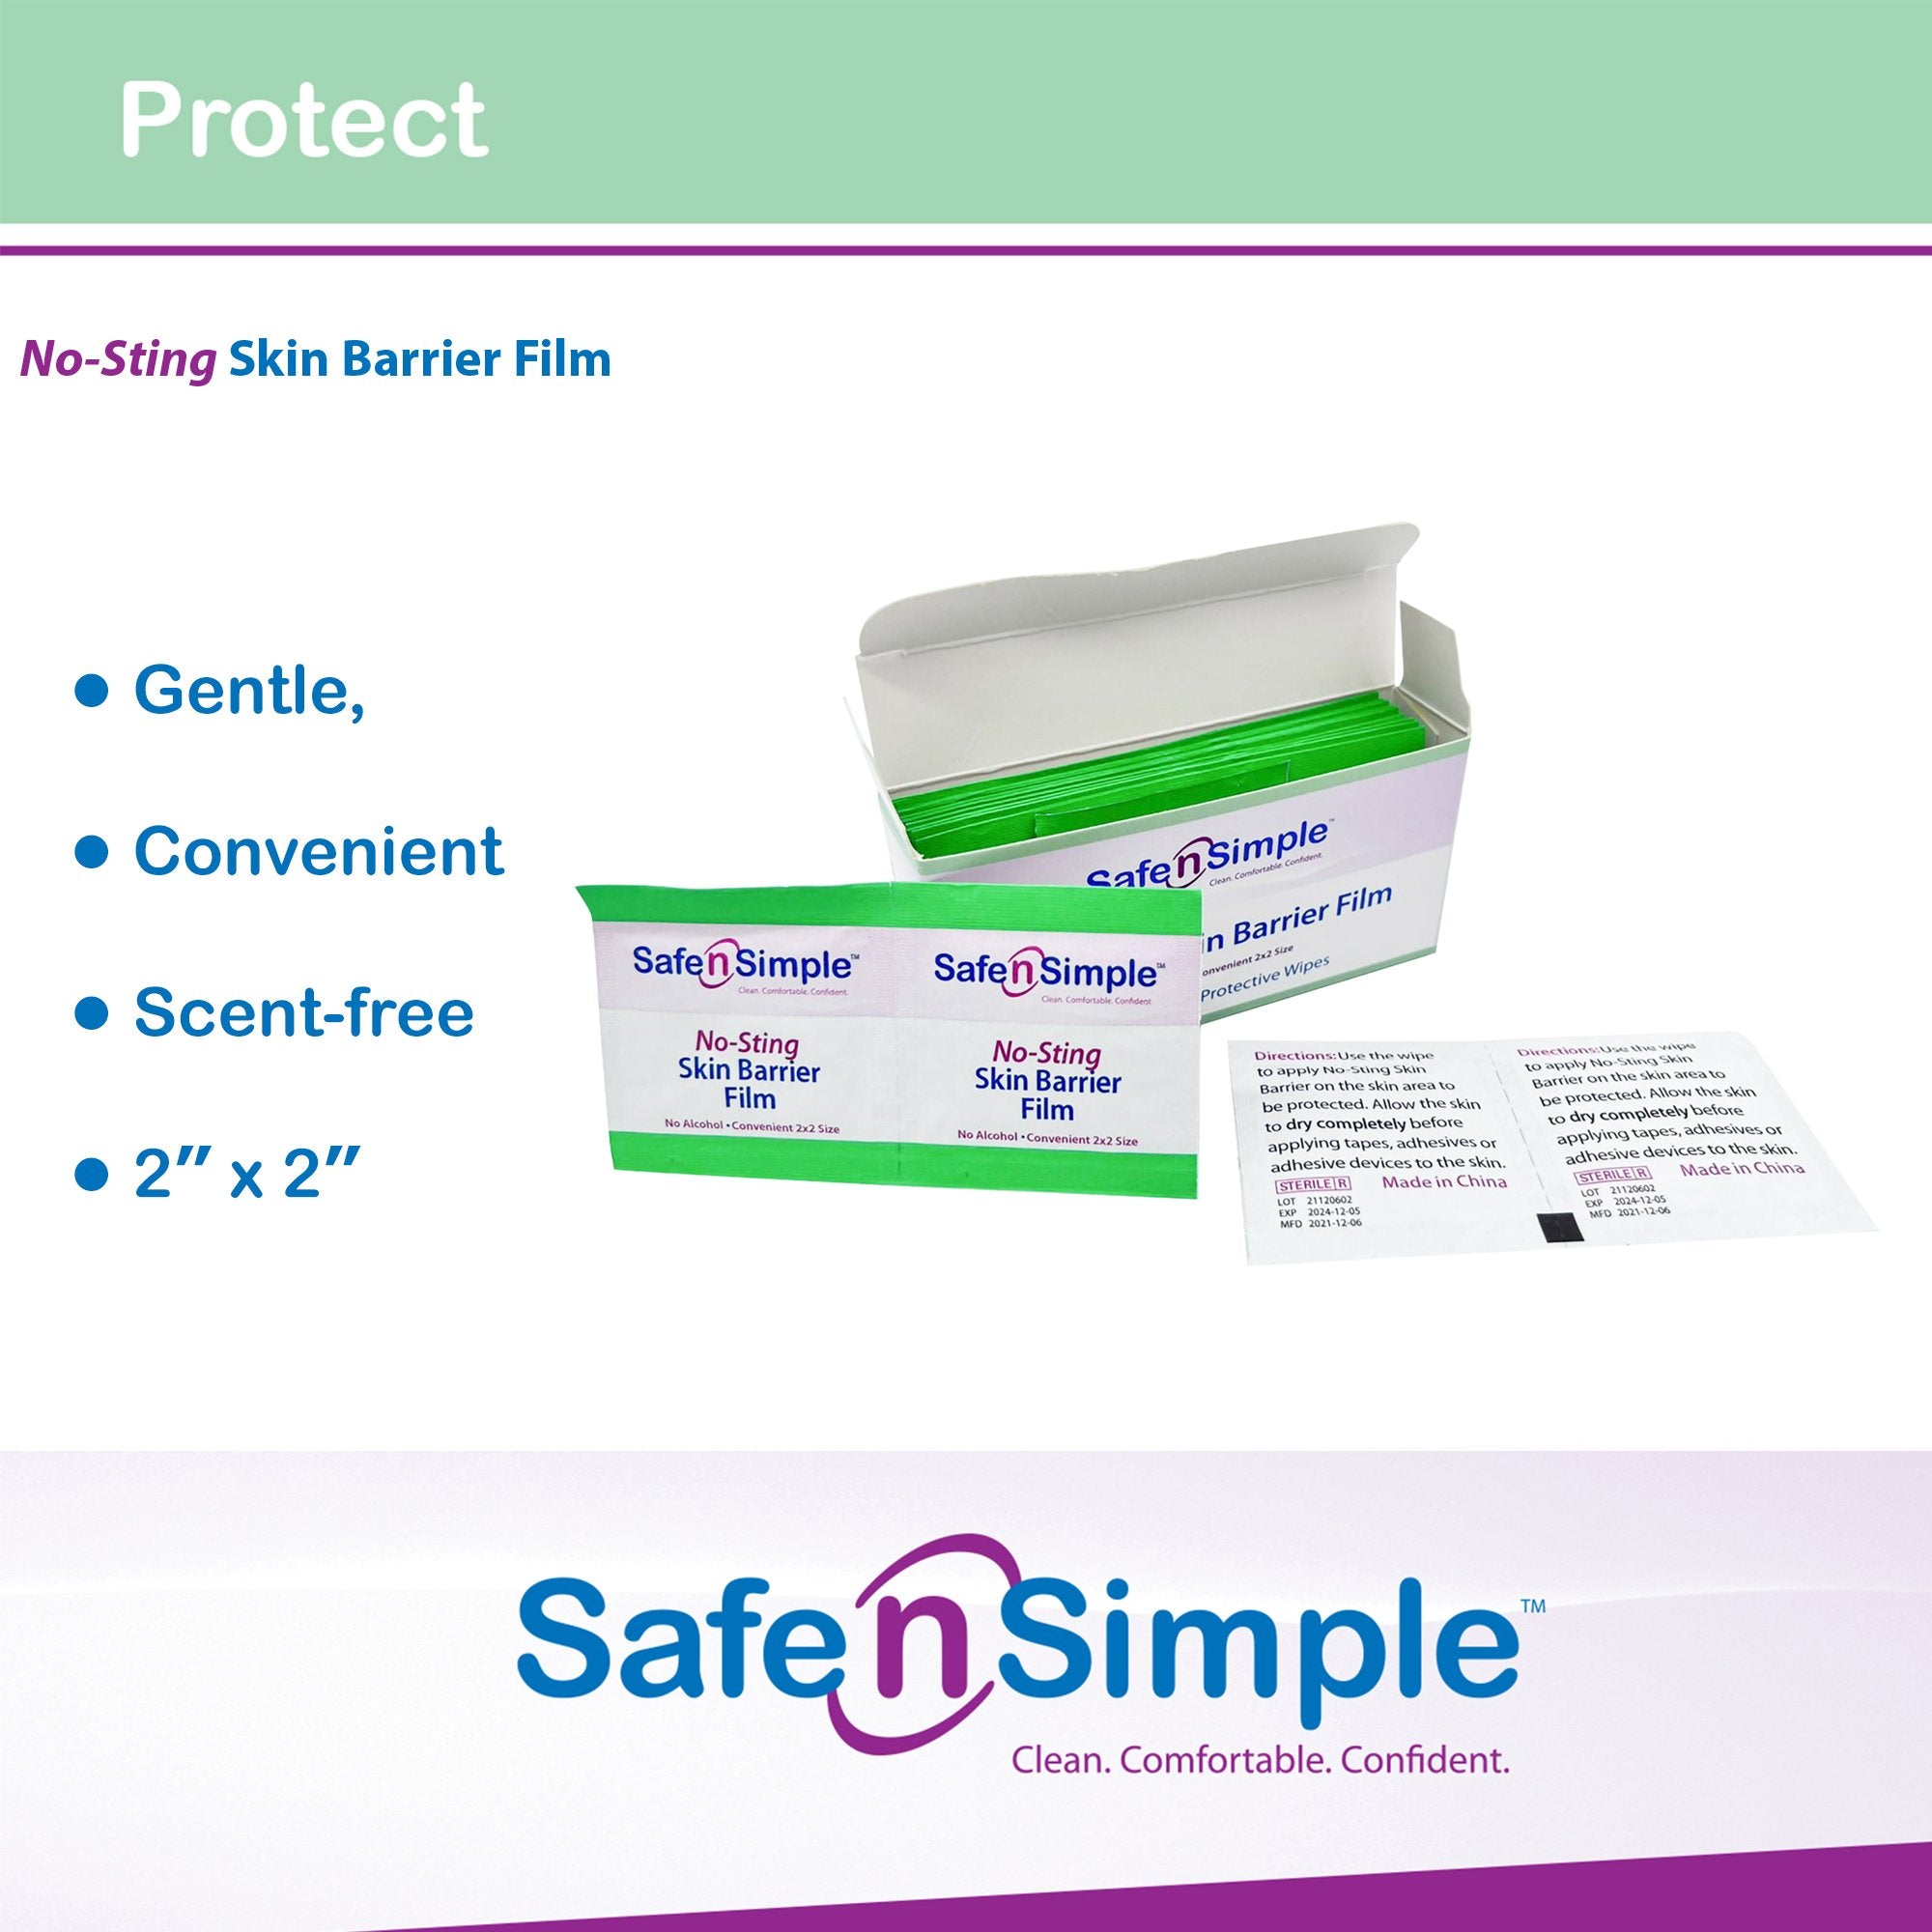 Skin Barrier Wipe Safe N Simple No-Sting 60% / 20% Strength Purified Water / Polyvinylpyrrolidone / Glycerin / Propylene Glycol Individual Packet Sterile